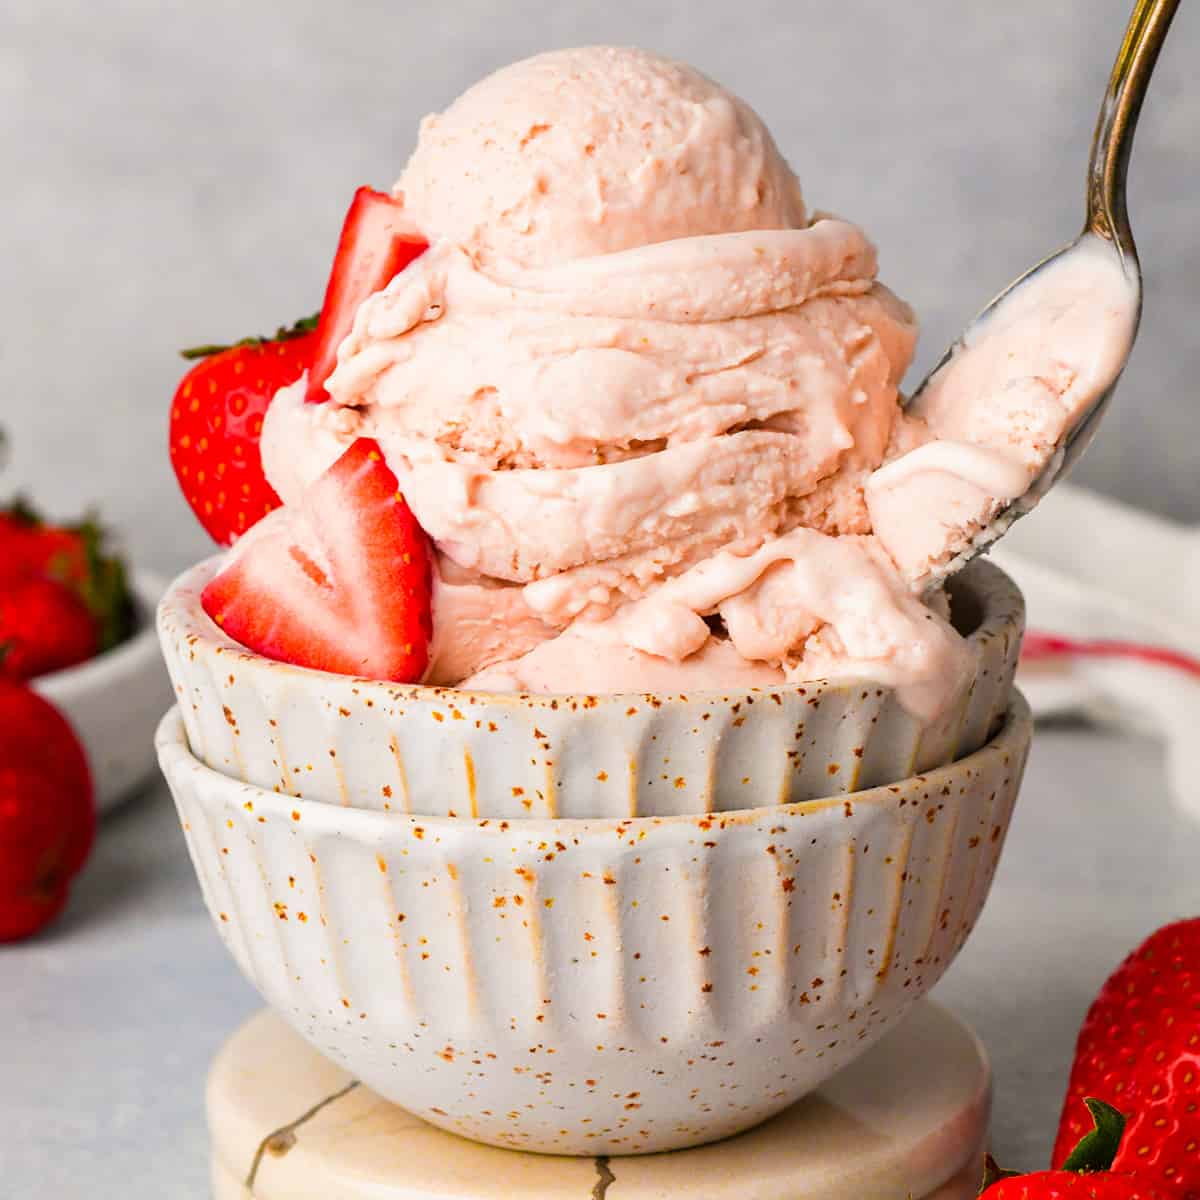 a bowl of strawberry ice cream with fresh strawberries and a spoon